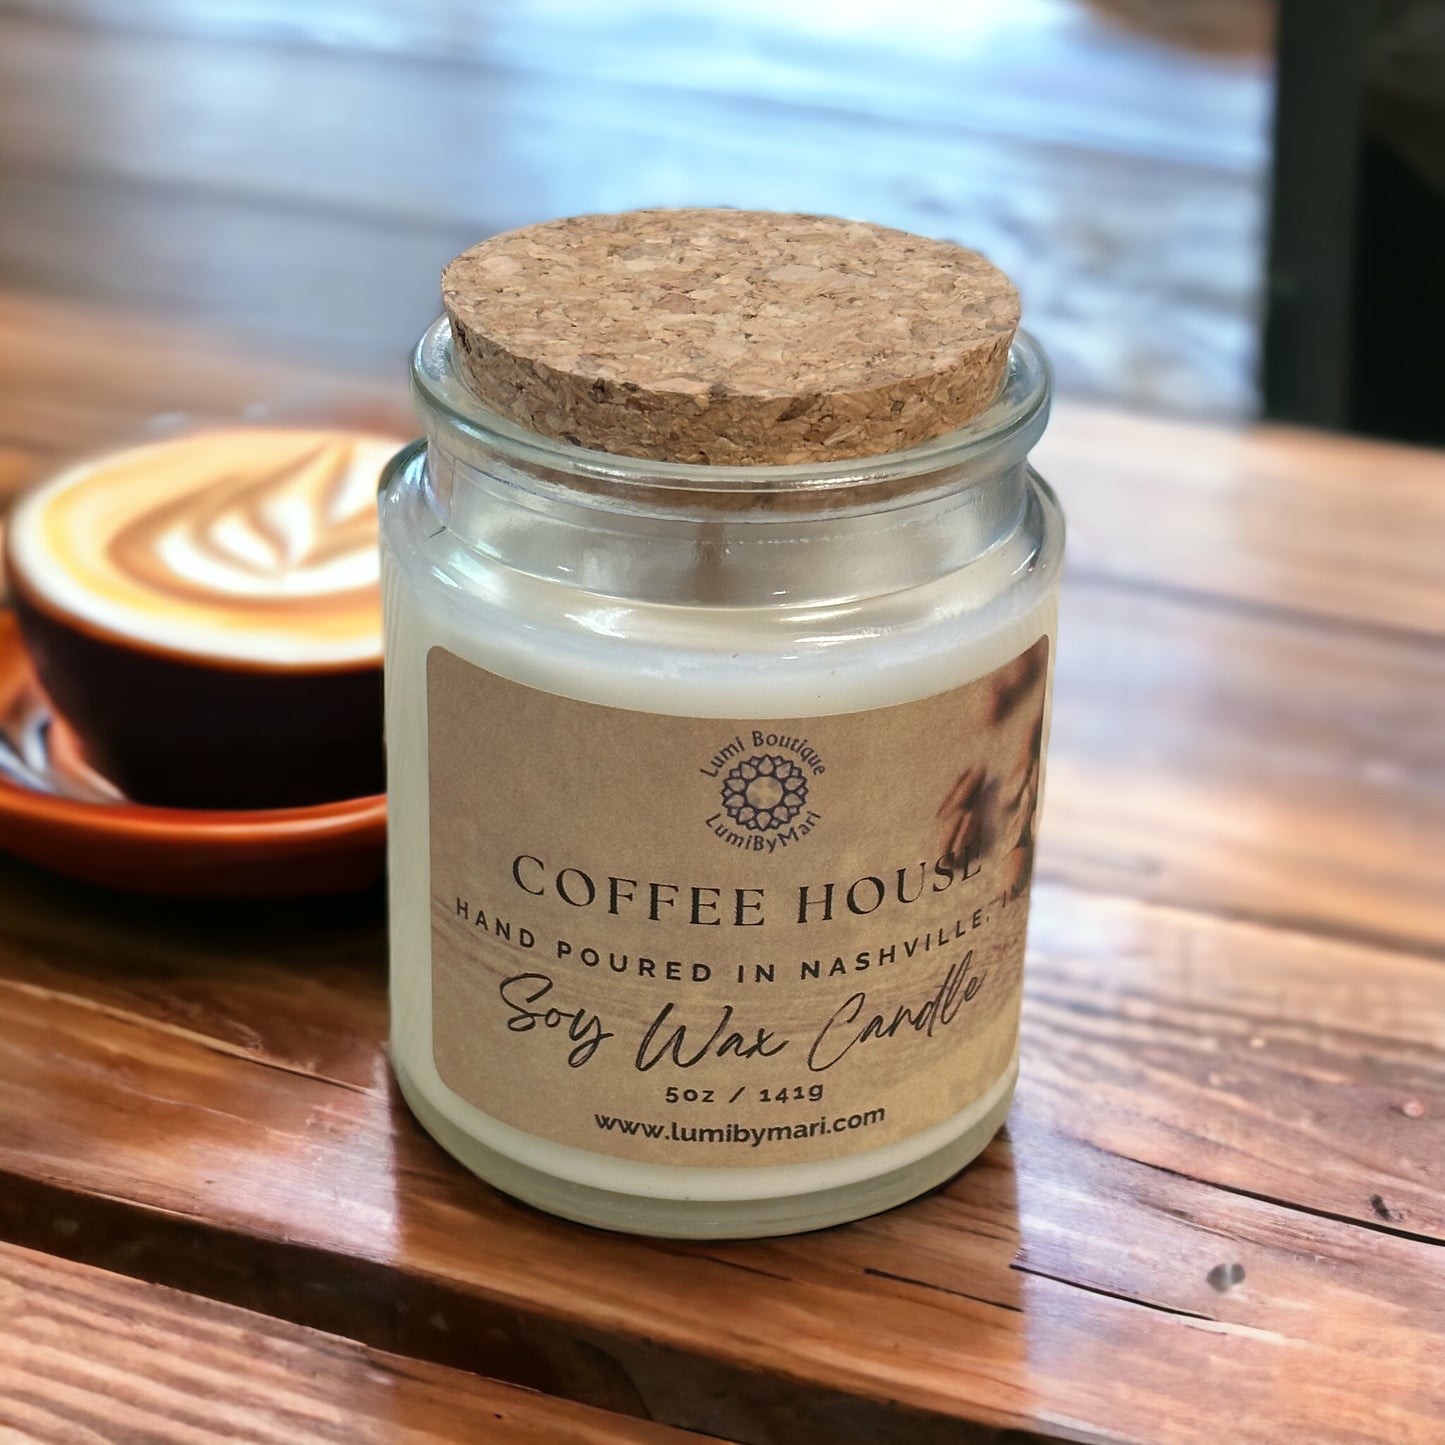 Coffee House Soy Candle